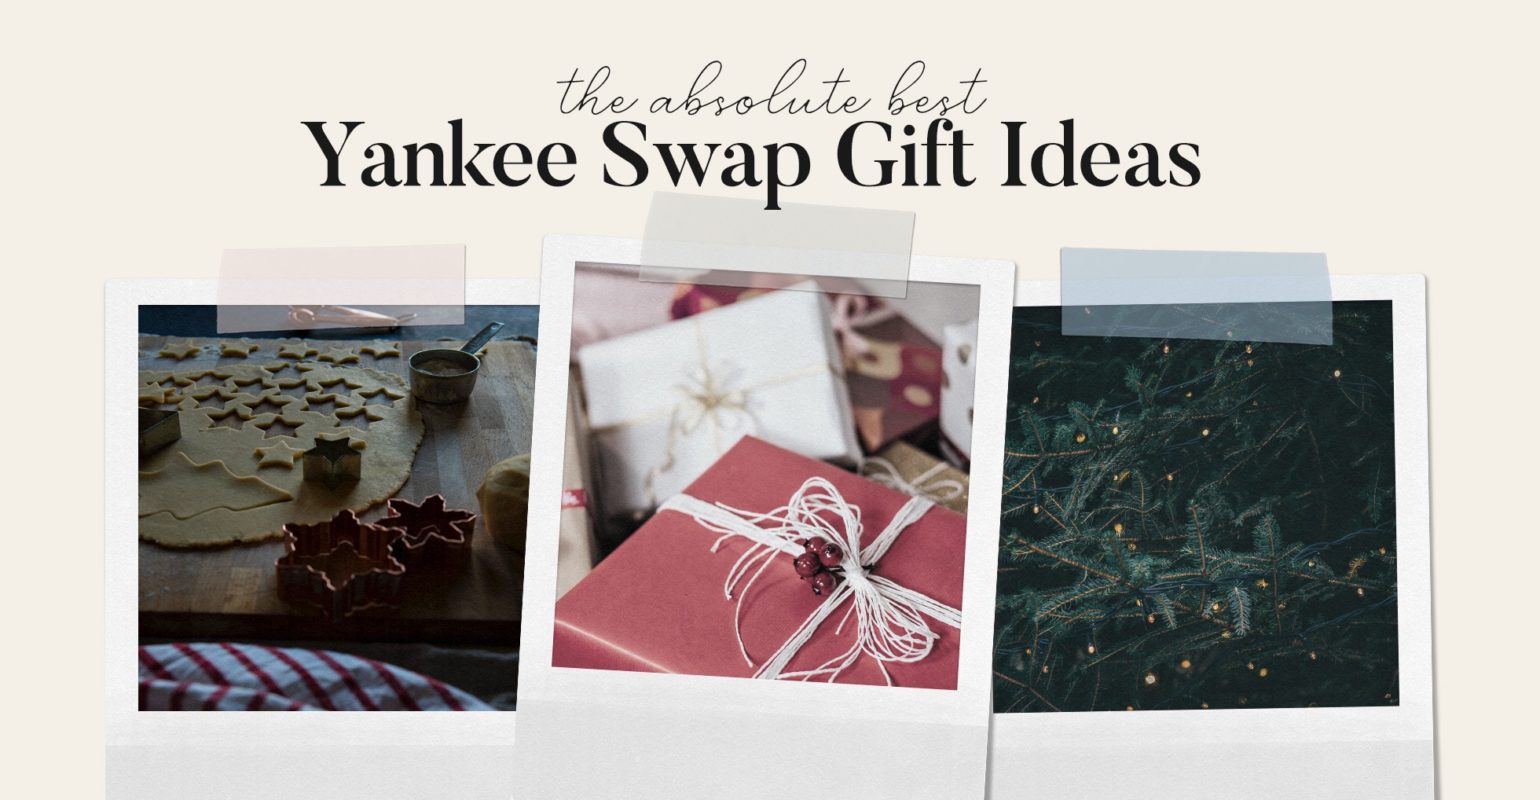 10 Best Yankee Swap Ideas for Livening Up Your Holiday Party